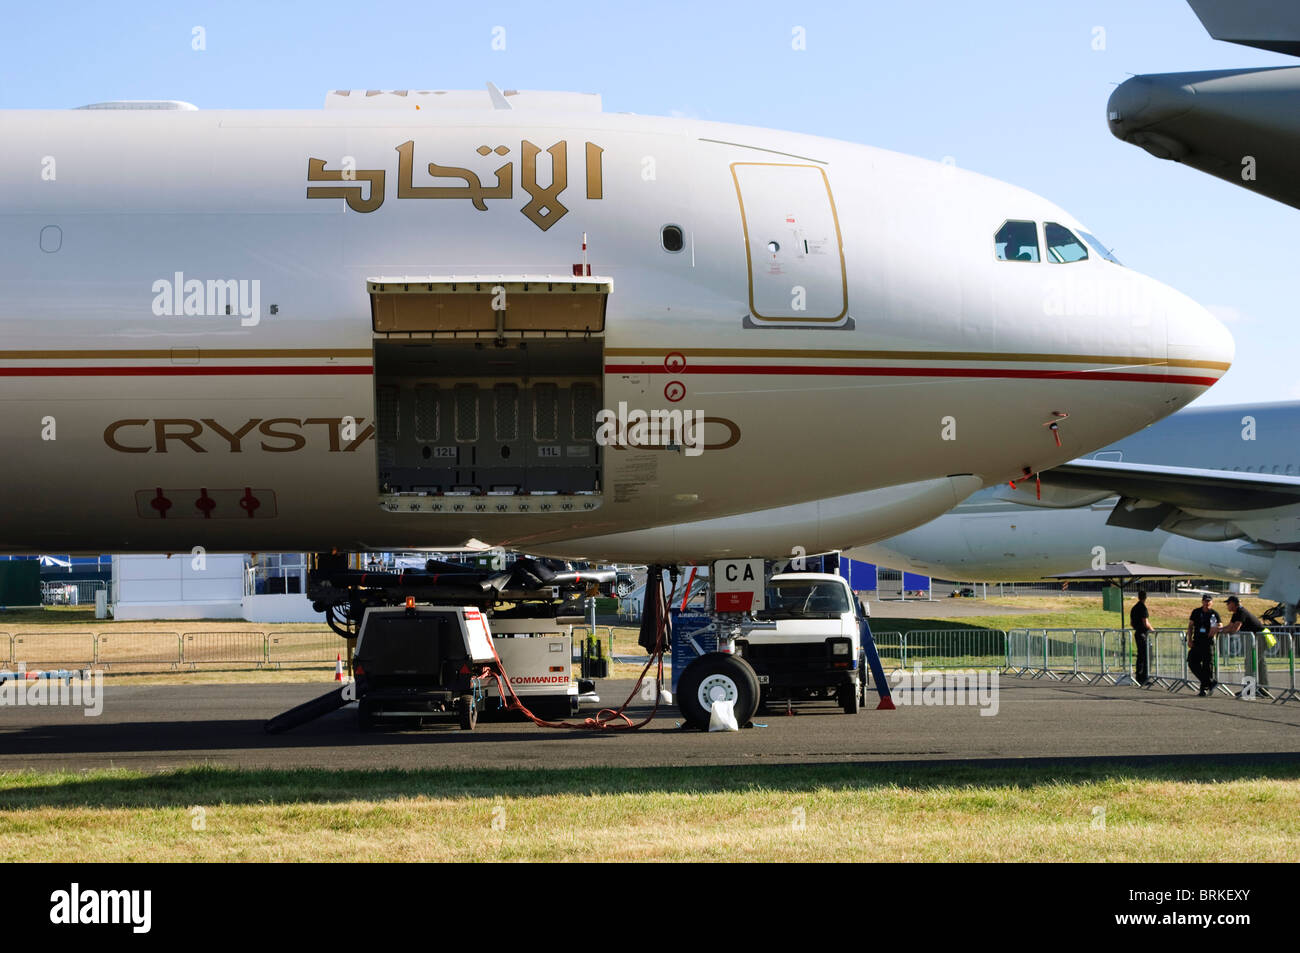 Airbus A330-243F operated by Etihad Crystal Cargo at Farnborough Airshow, UK. Stock Photo